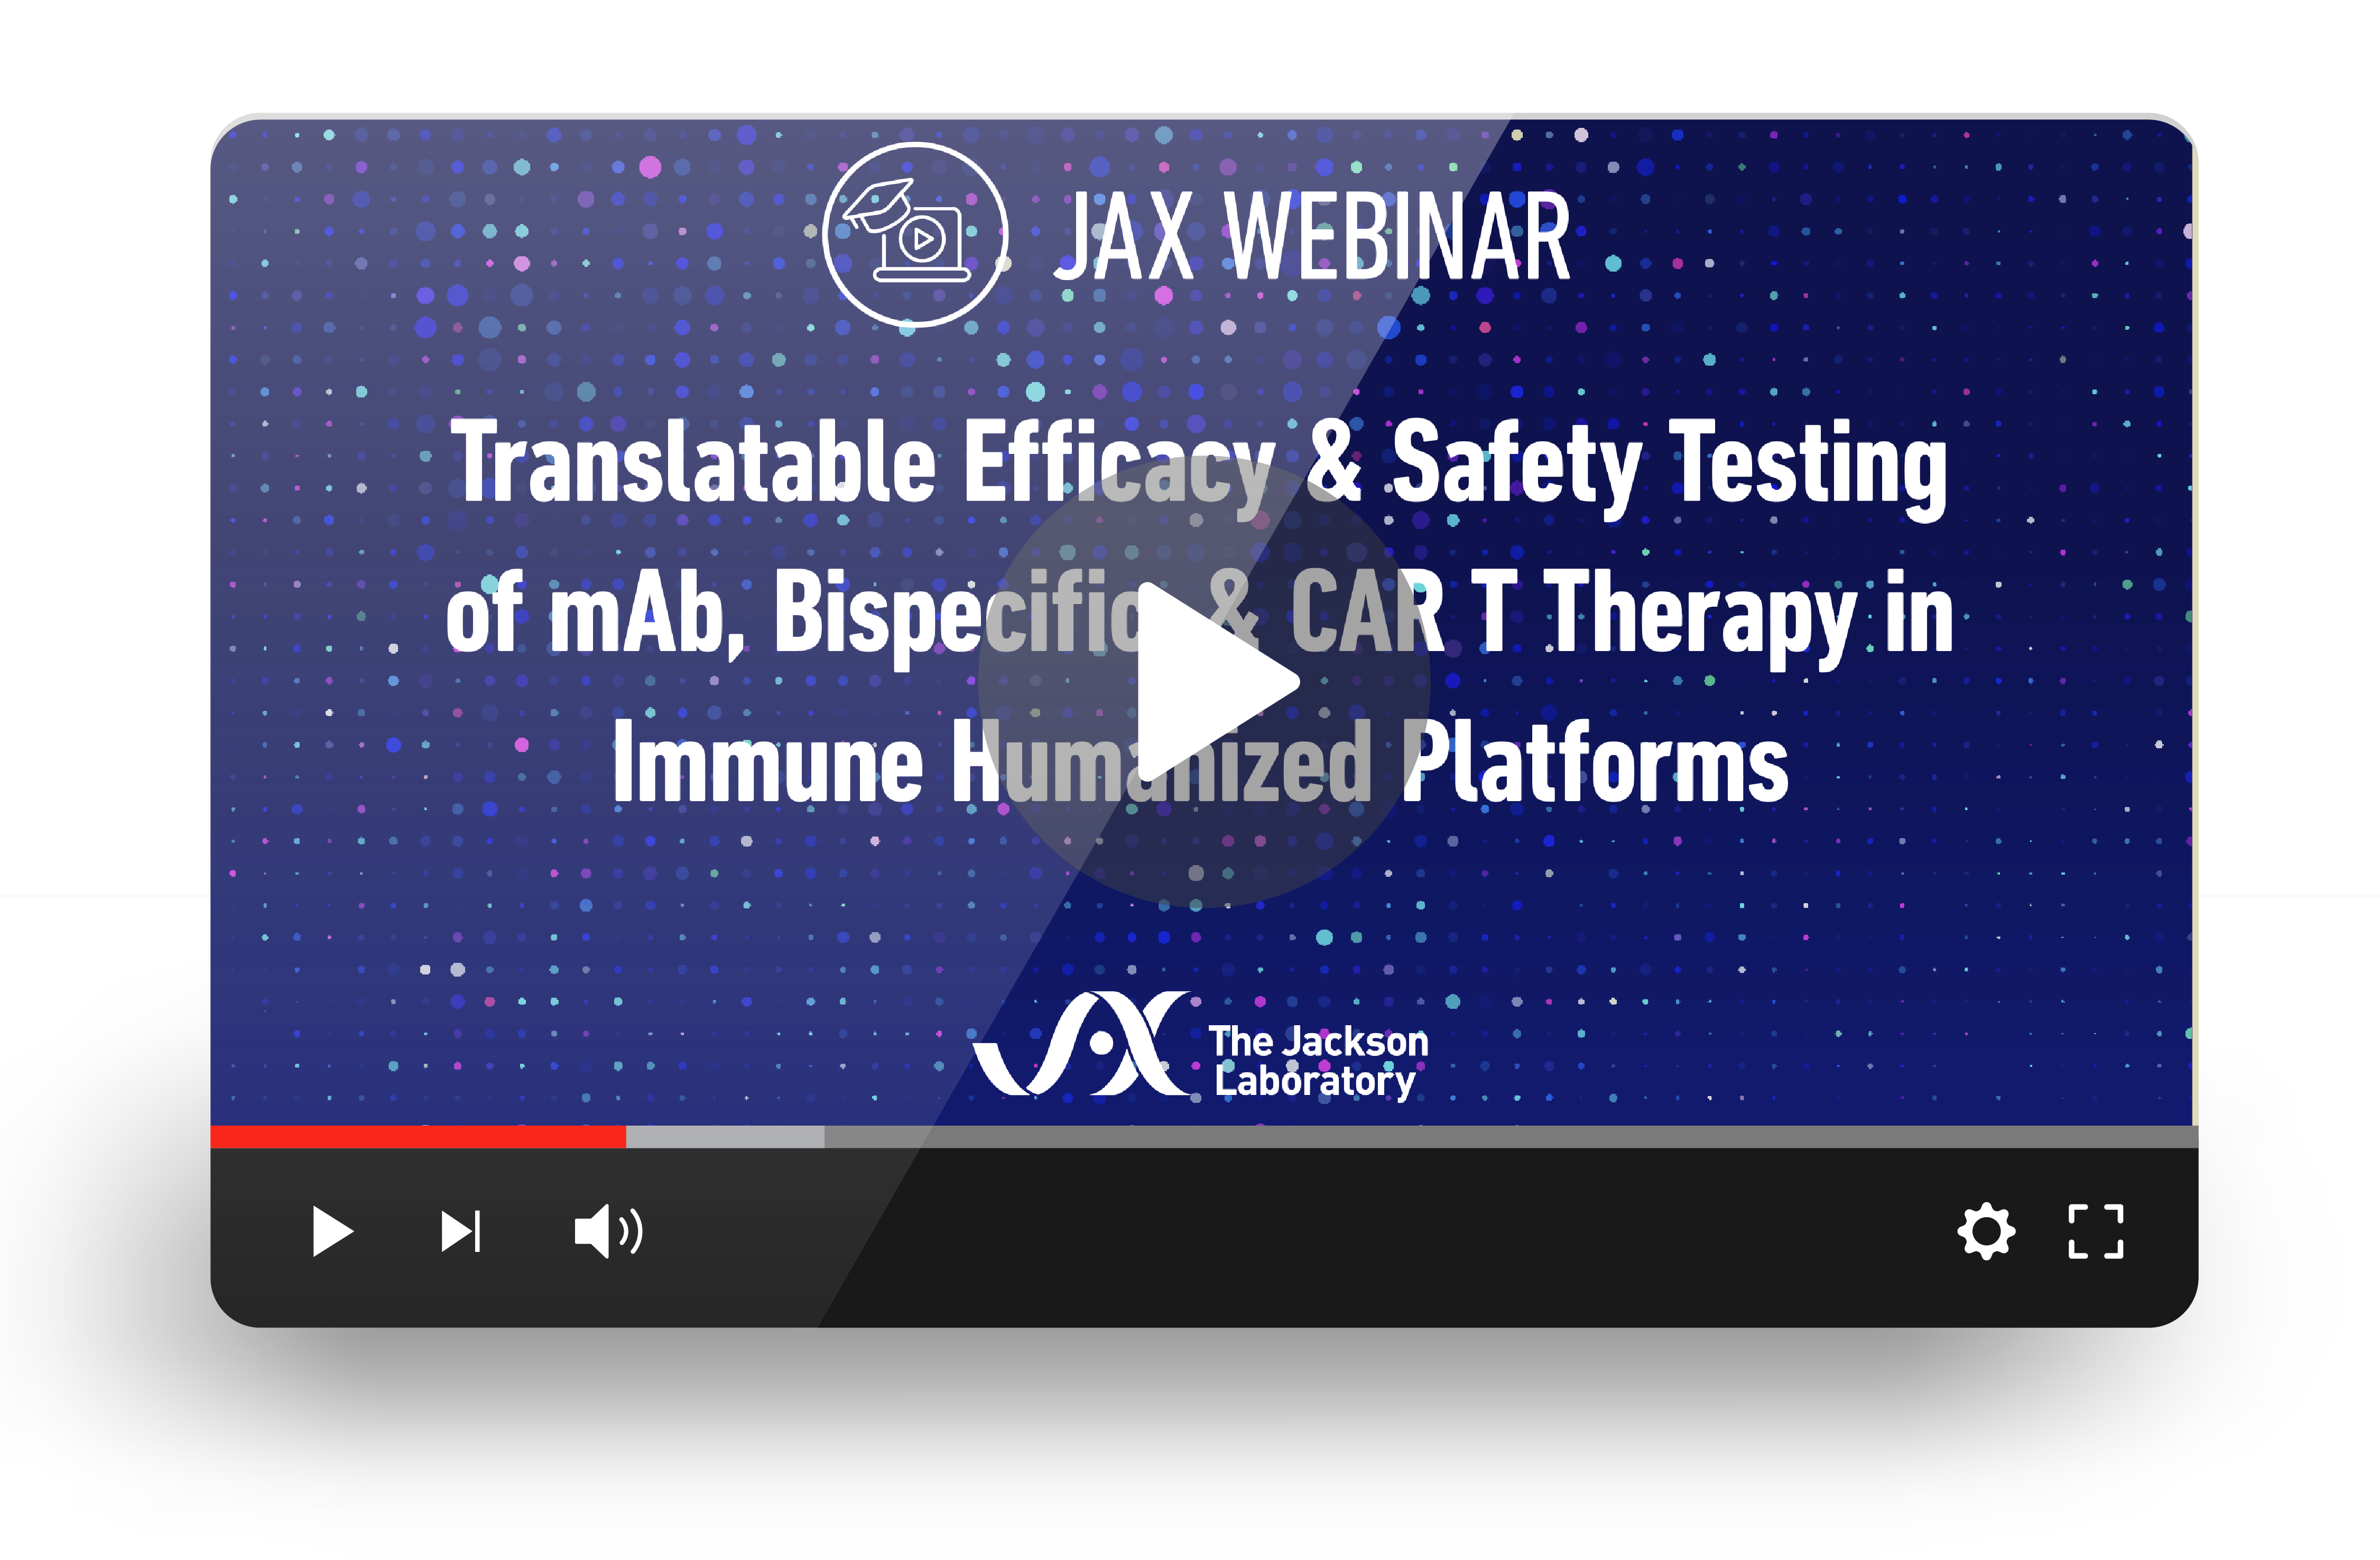 JAX Webinar on humanized platforms for mAb, bispecific, and CAR-T therapeutics